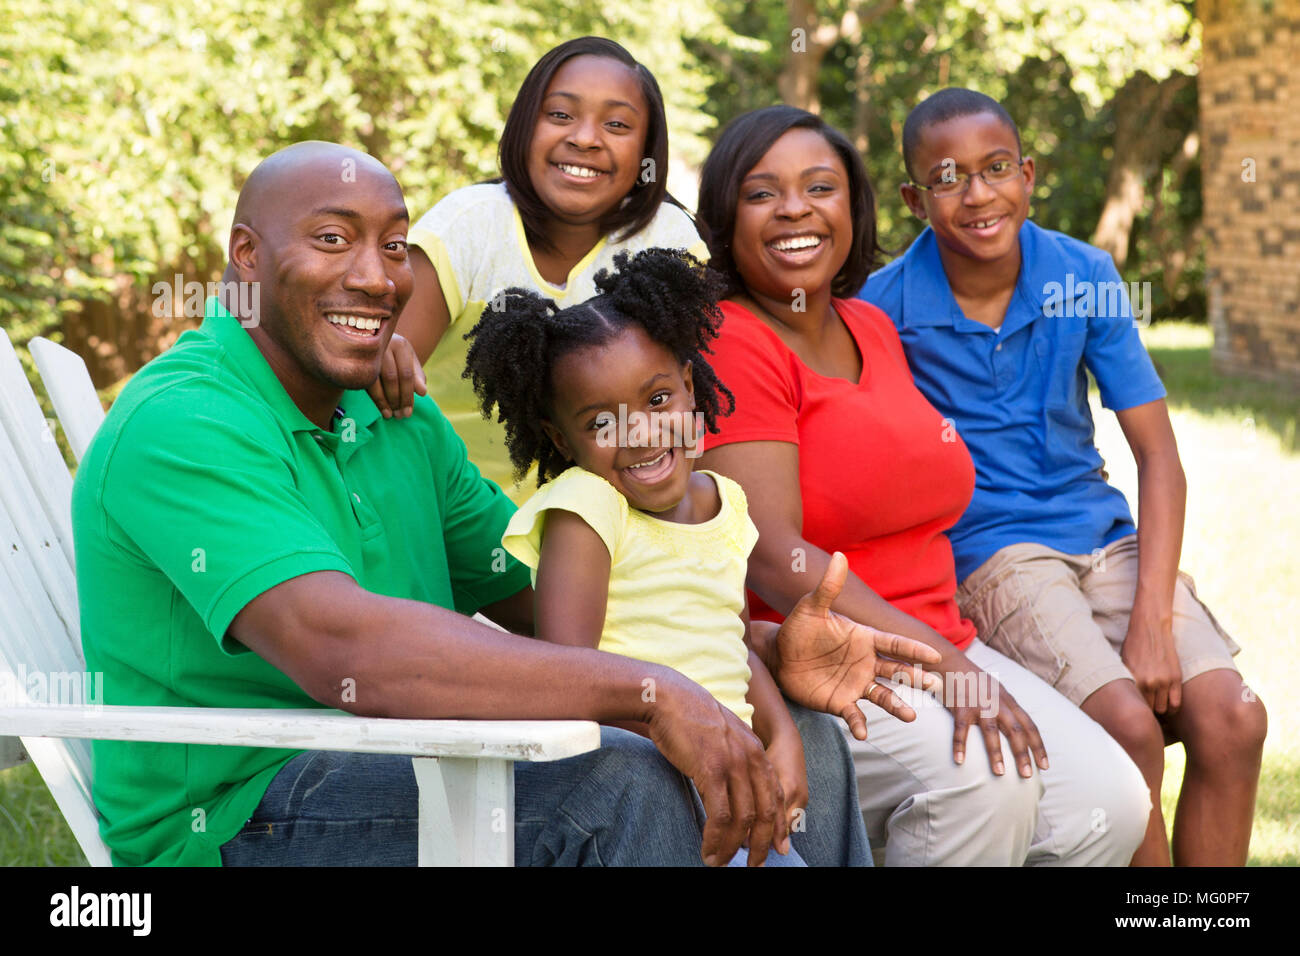 Happy African American Family. Stockfoto